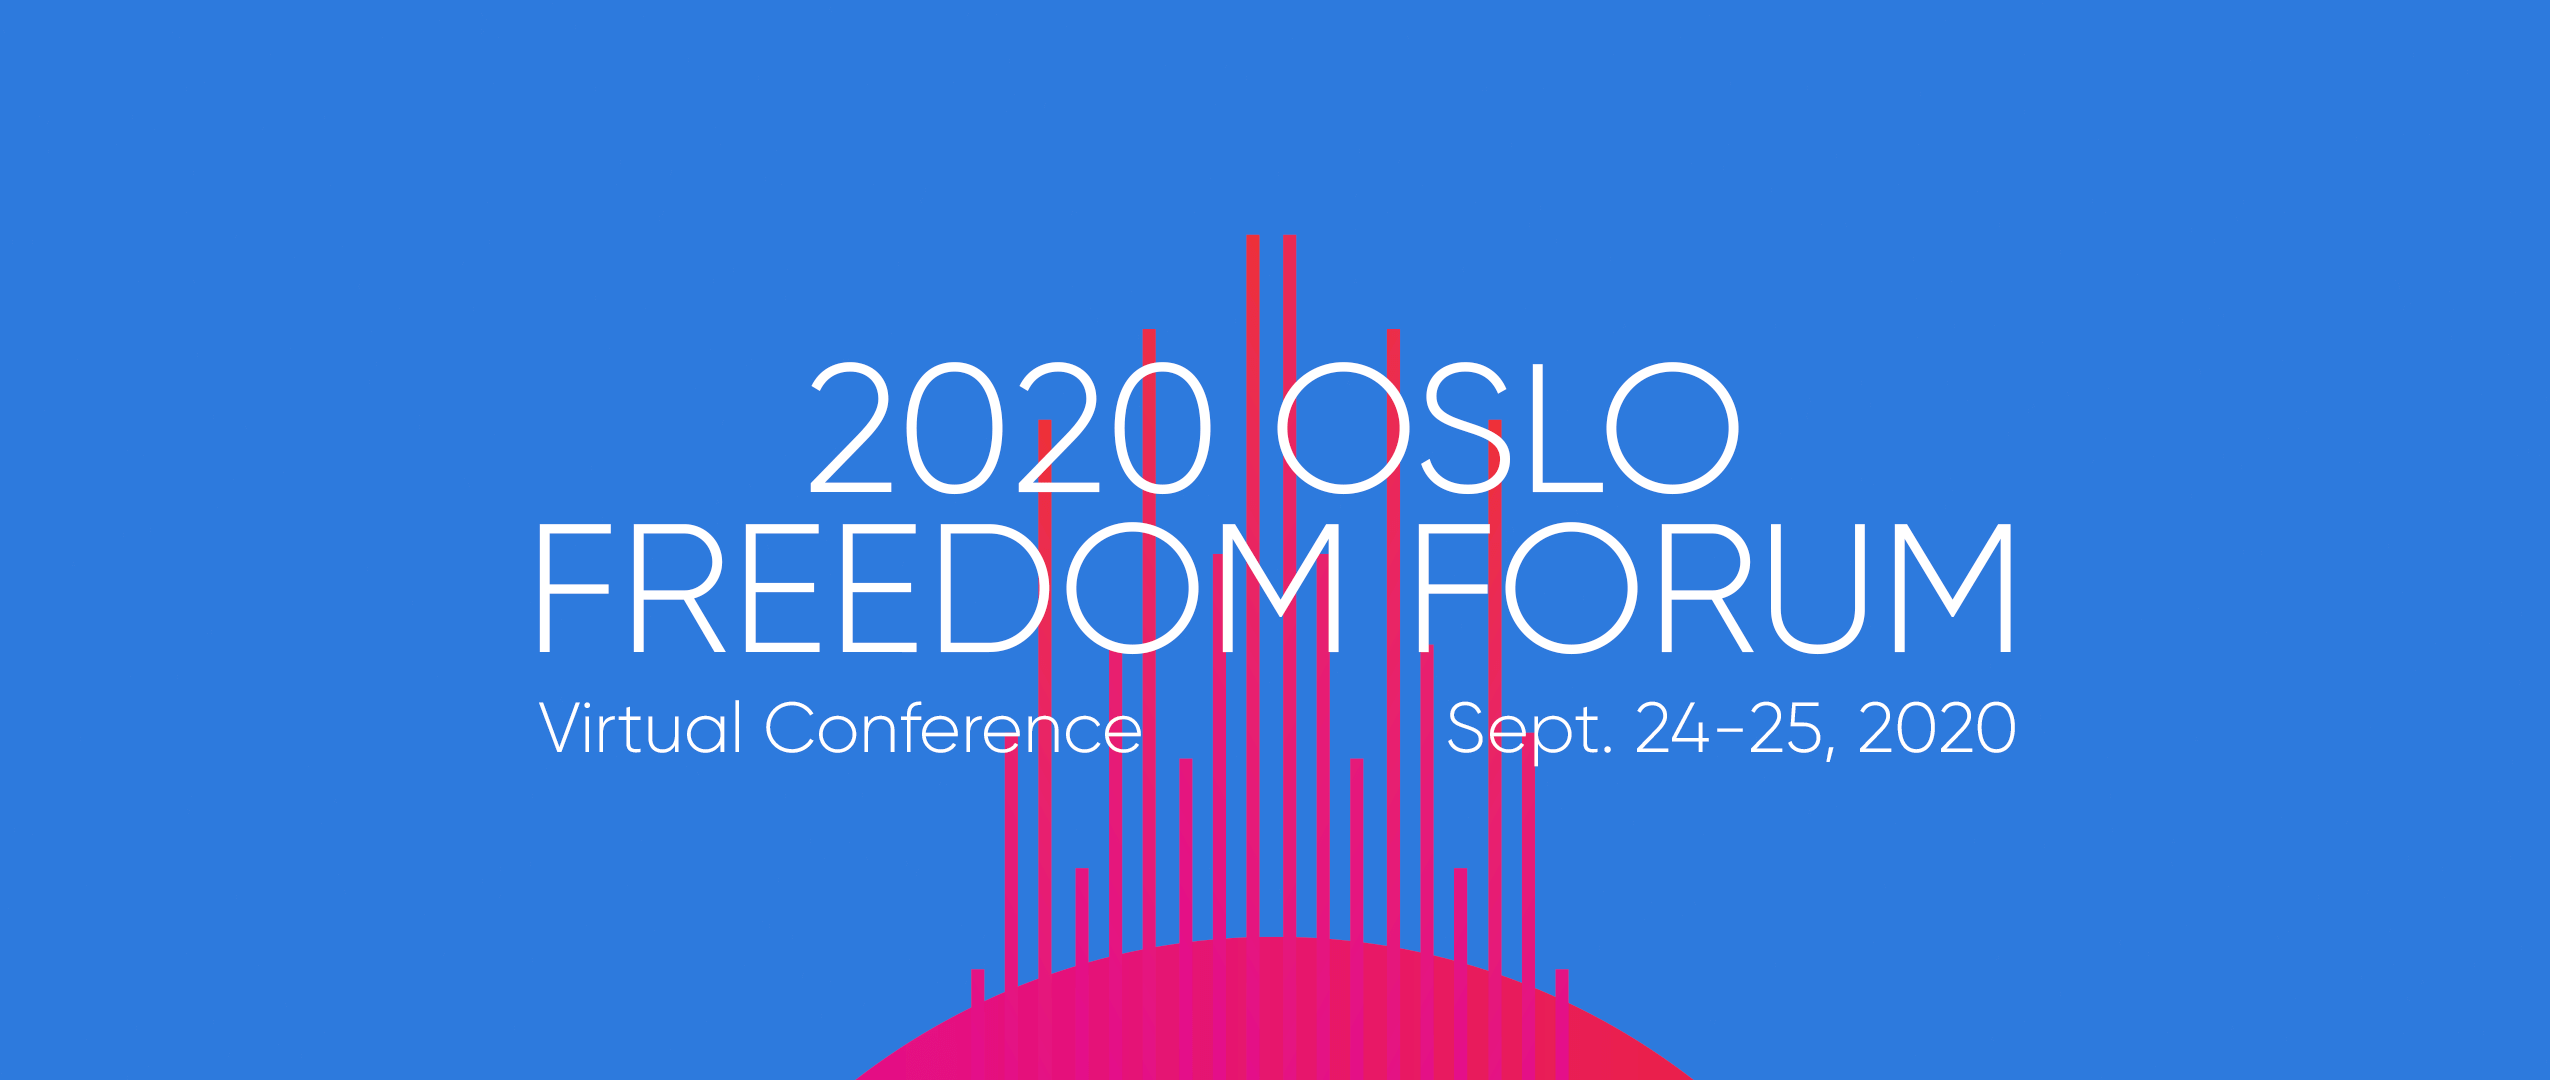 Announcing the 2020 Oslo Freedom Forum